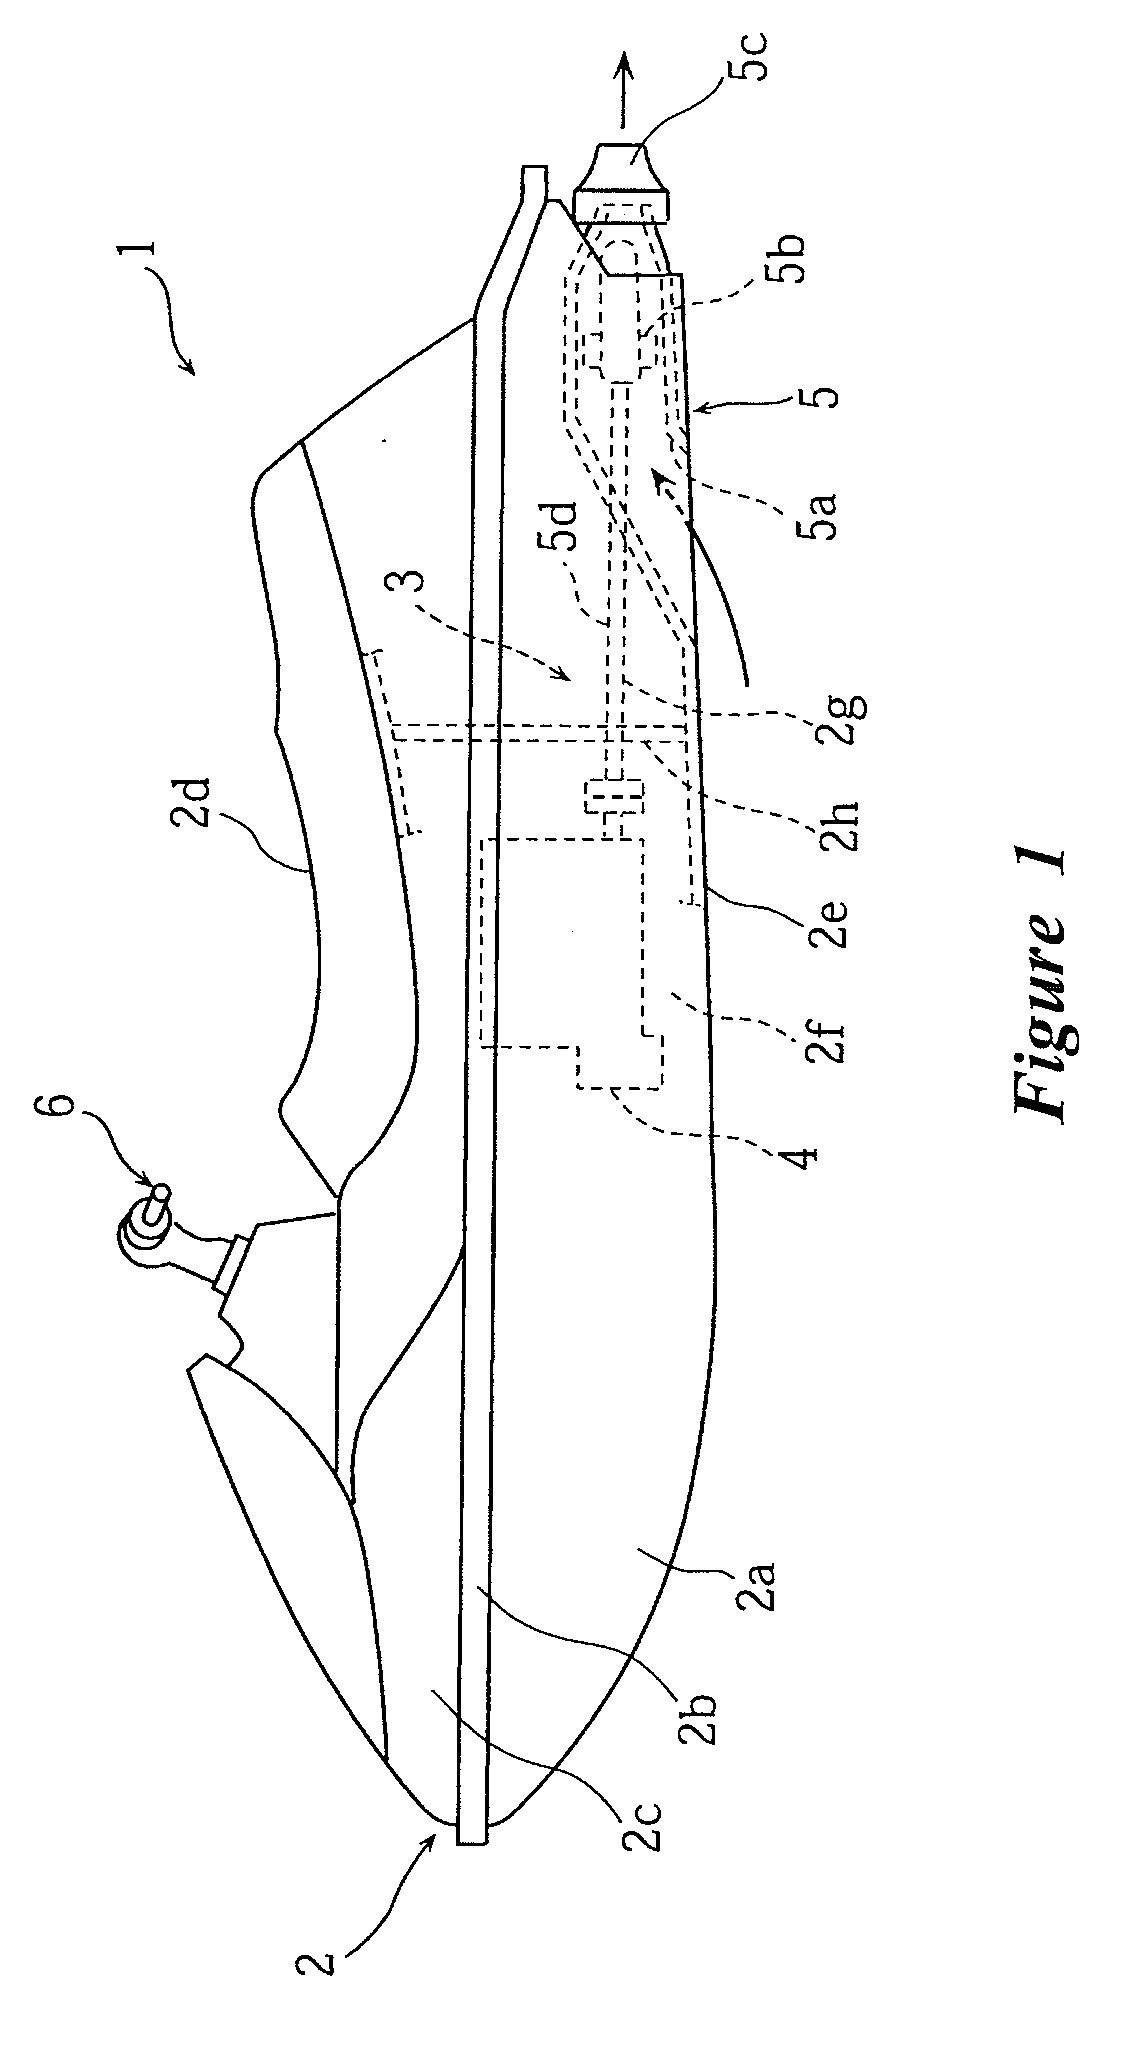 Multiple-Cylinder Engine for Planing Water Vehicle